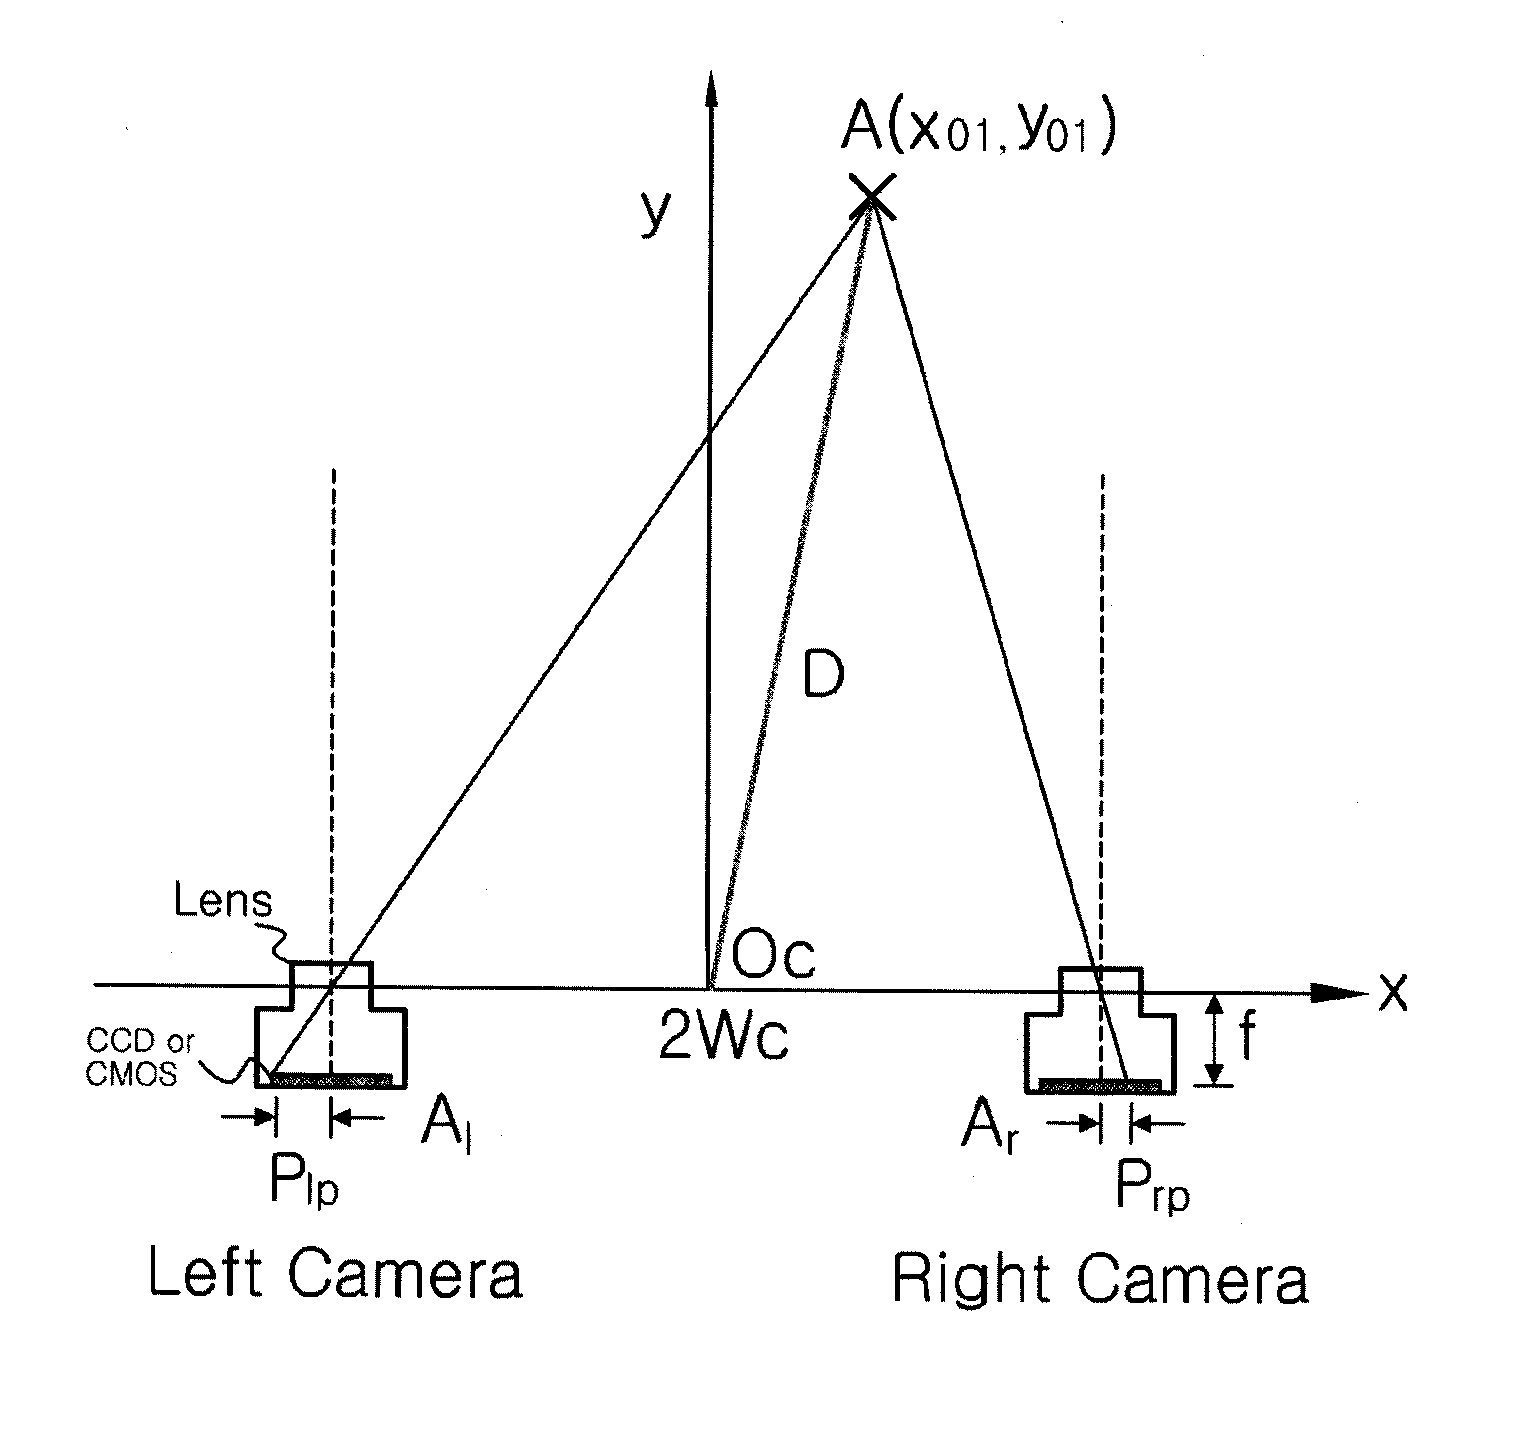 Image sensor for generating stereoscopic images